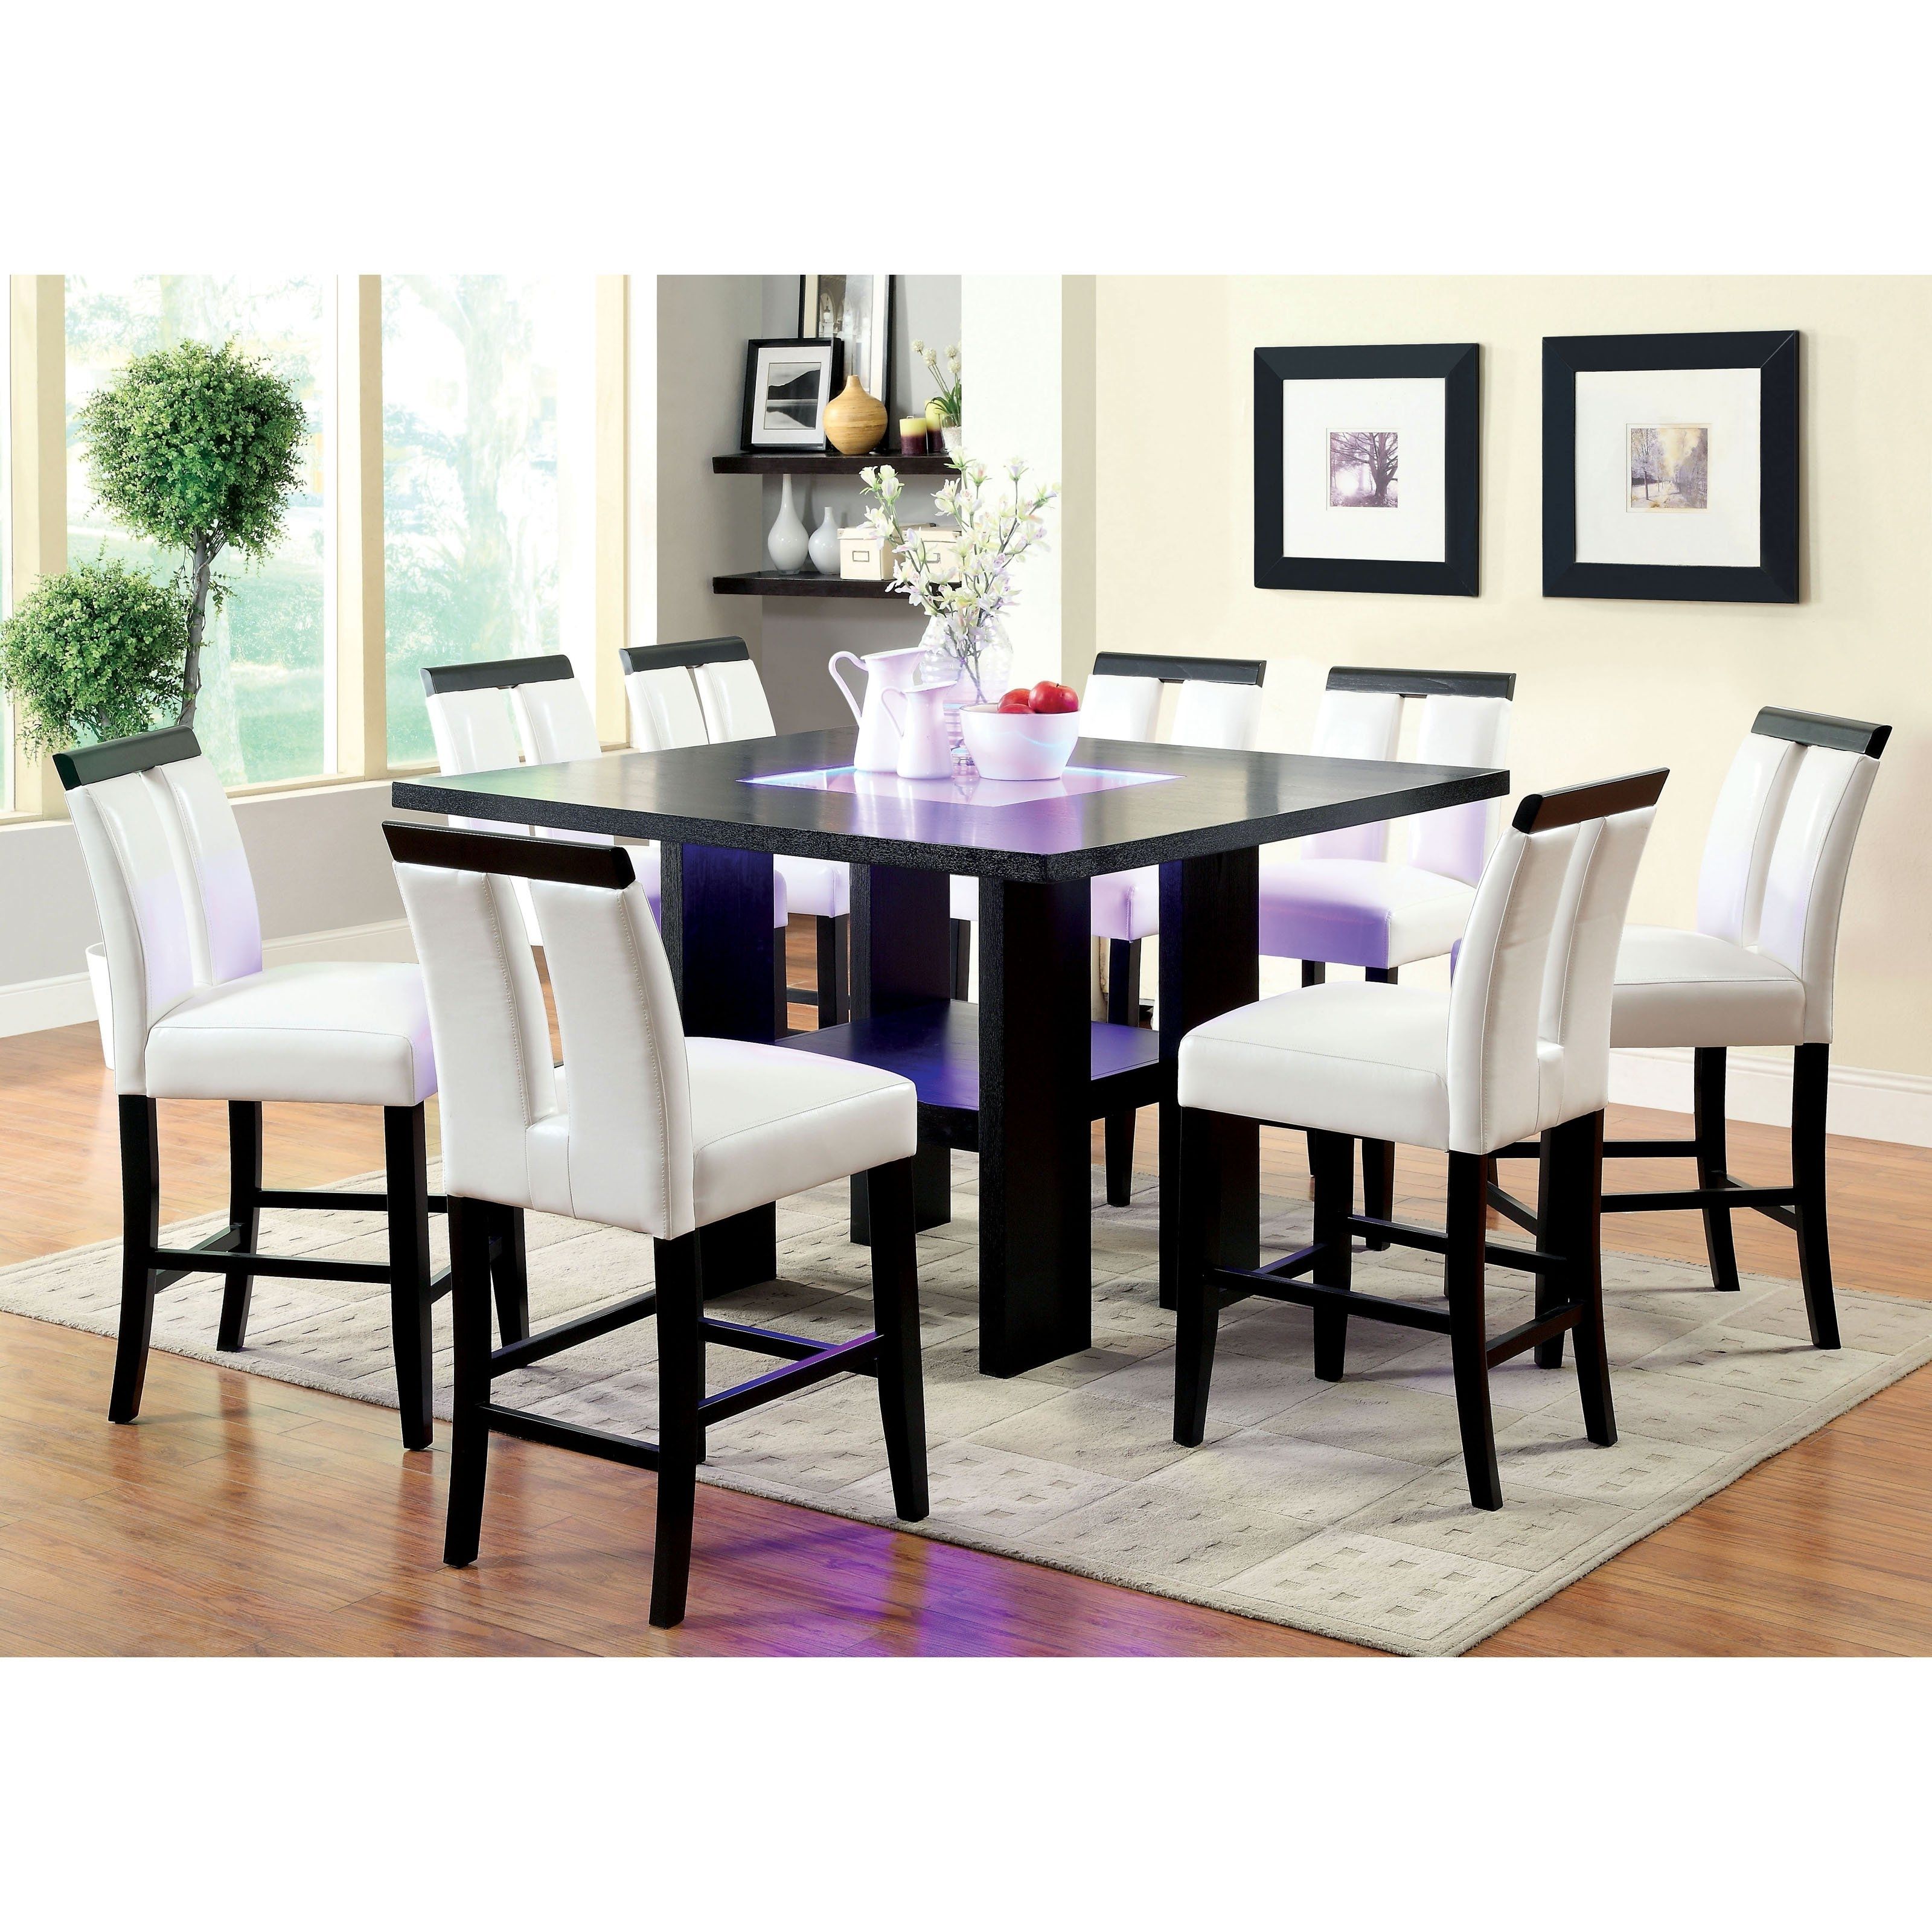 Furniture Of America Luminate Contemporary 9 Piece Illuminating Intended For 2017 Logan 7 Piece Dining Sets (View 16 of 20)